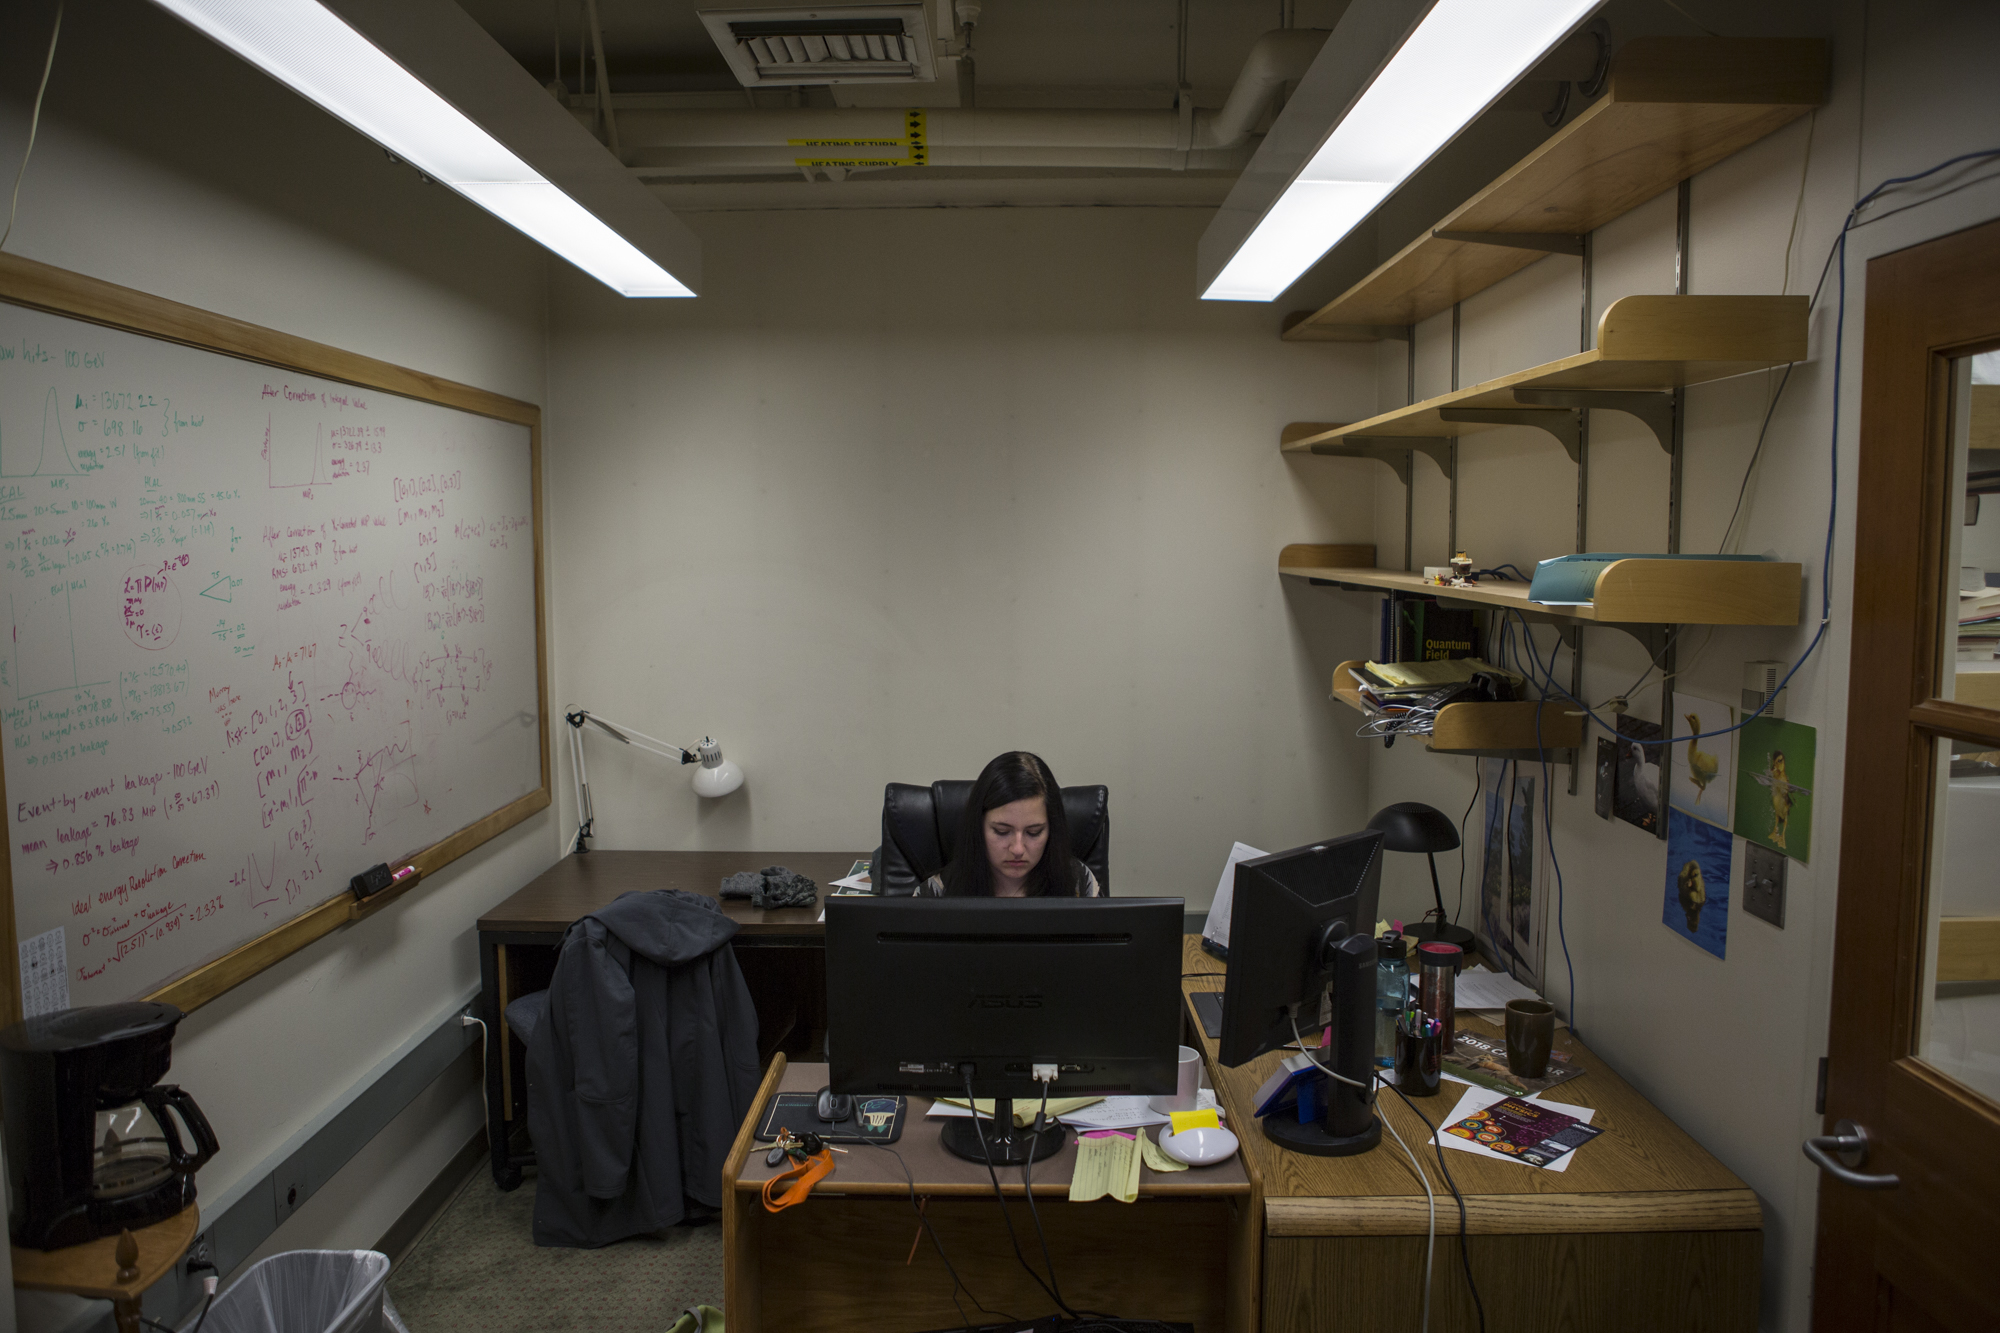  A mere month before heading to Switzerland to help design high energy experiments at CERN's Large Hadron Collider (LHC), Amanda Steinhebel analyzes data in her modest office at the University of Oregon.  